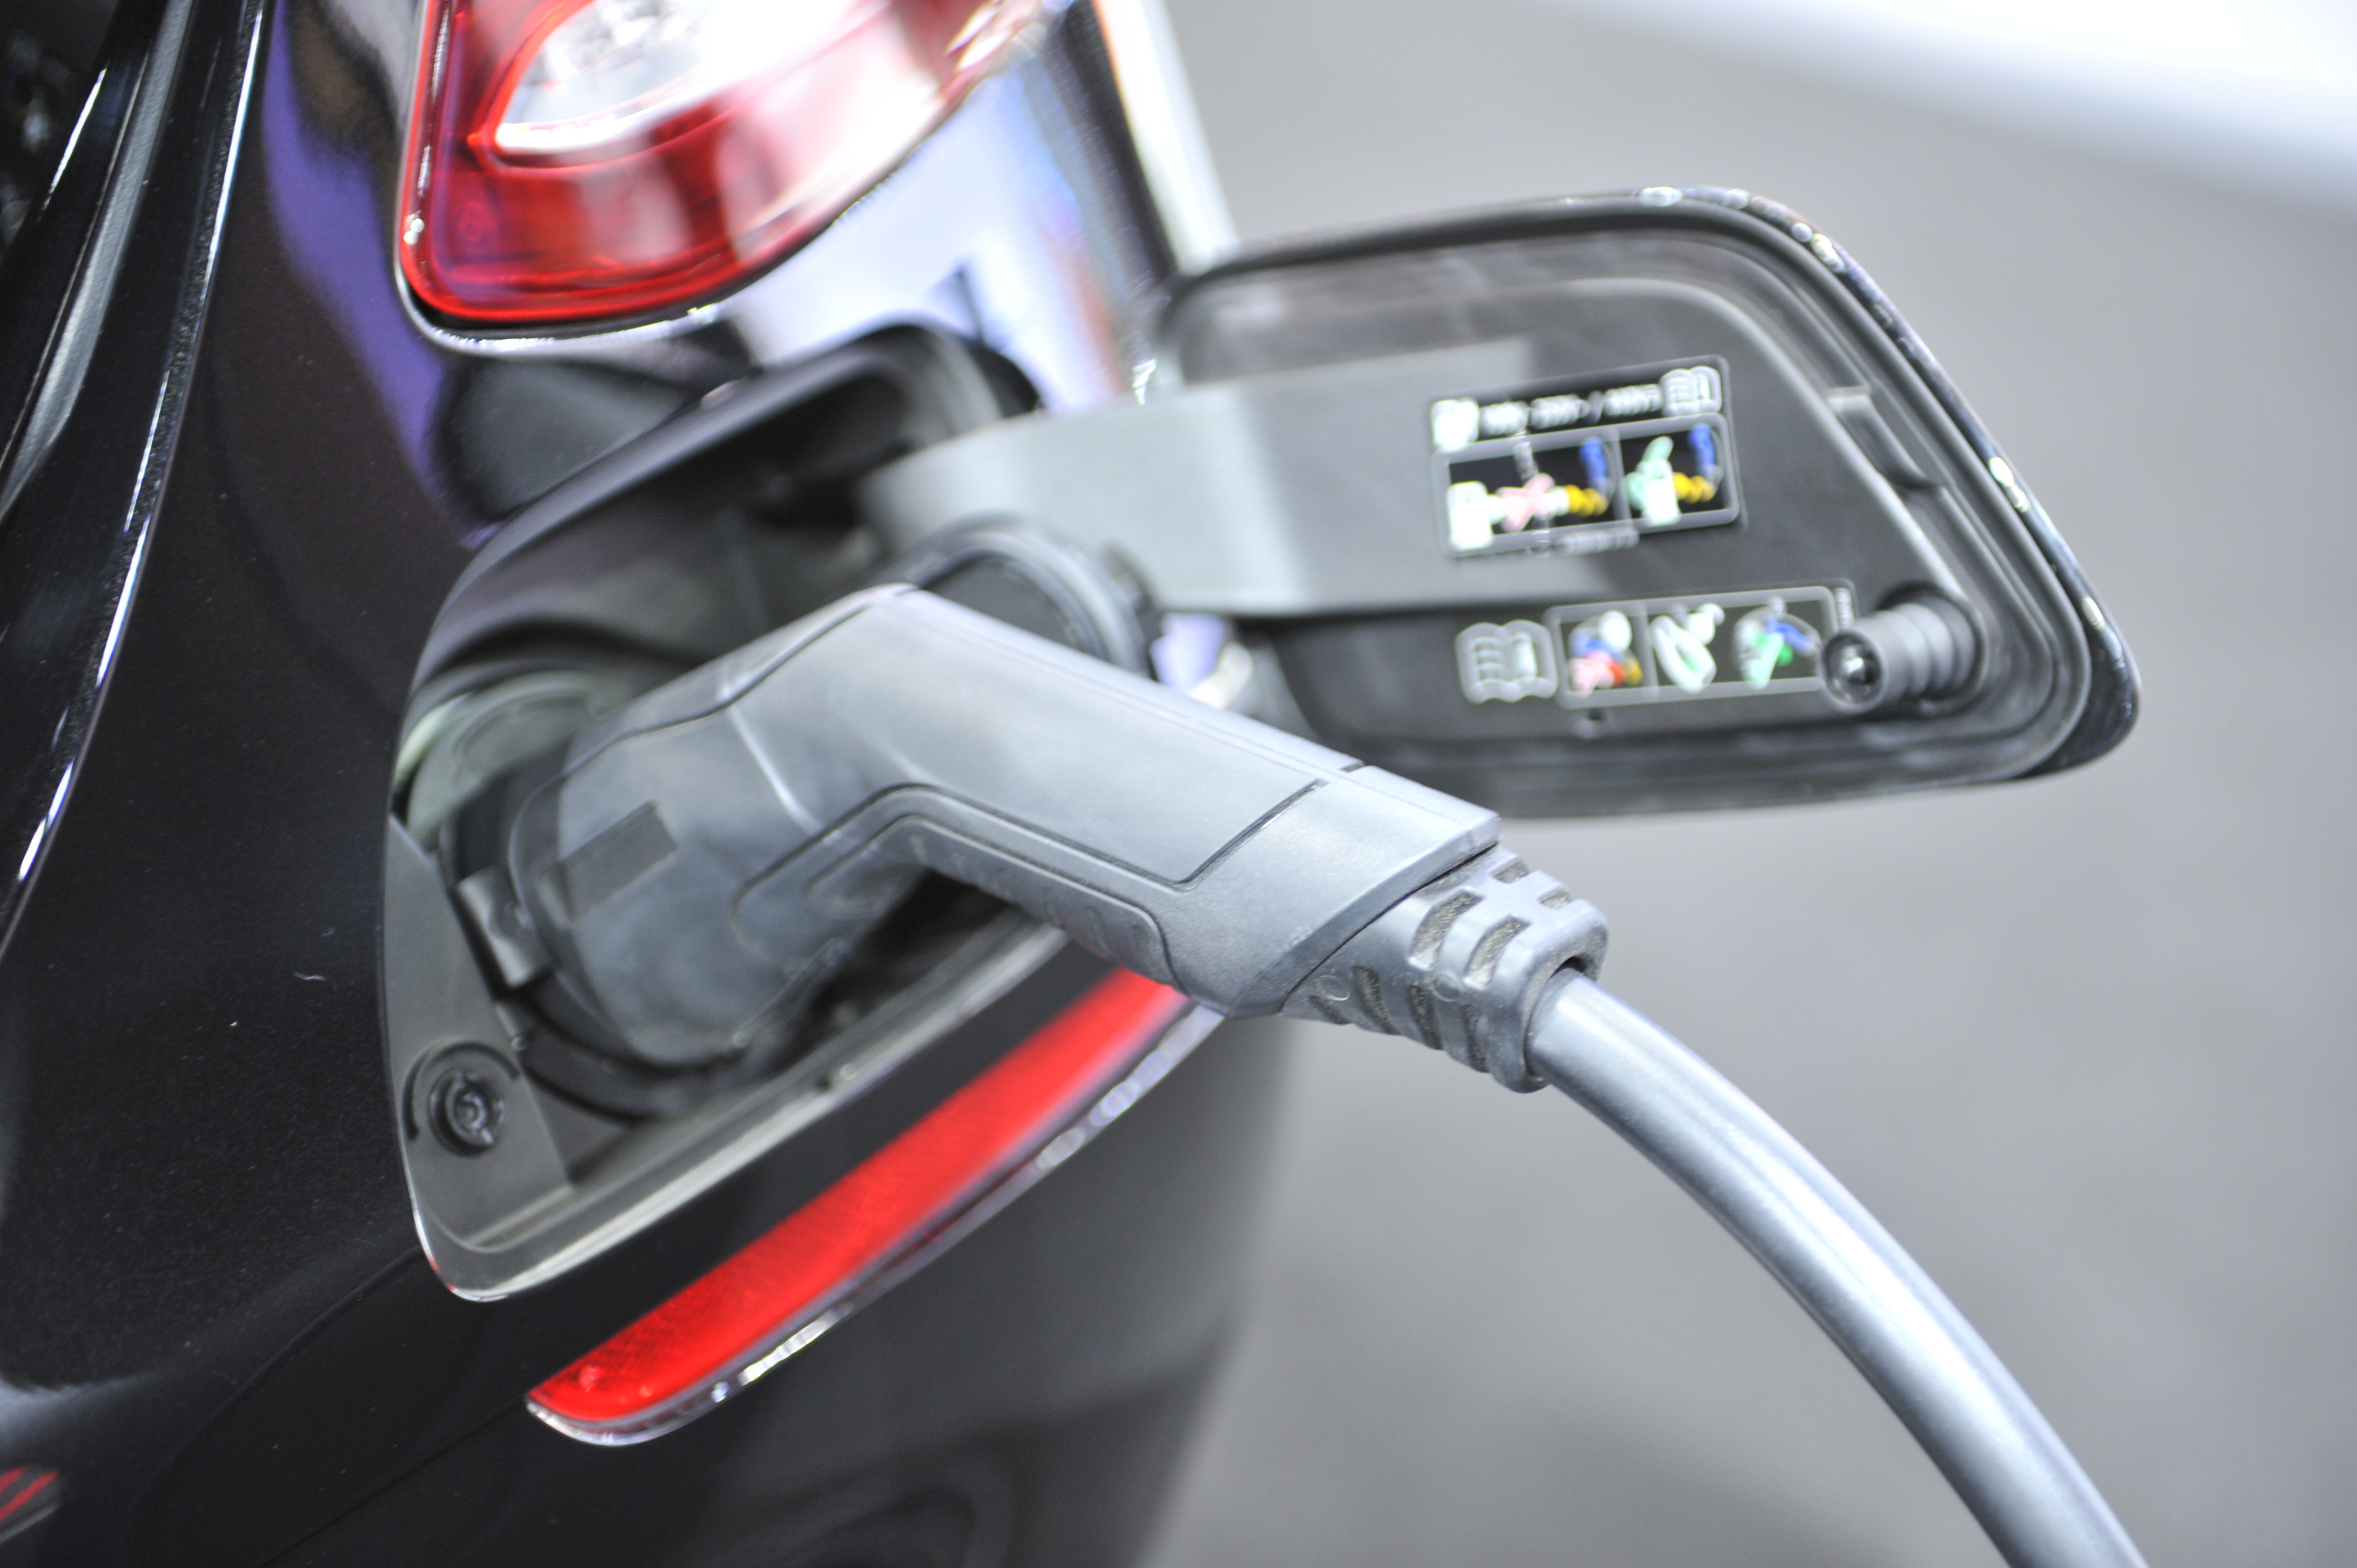 Electric car charge (Image: Shutterstock)